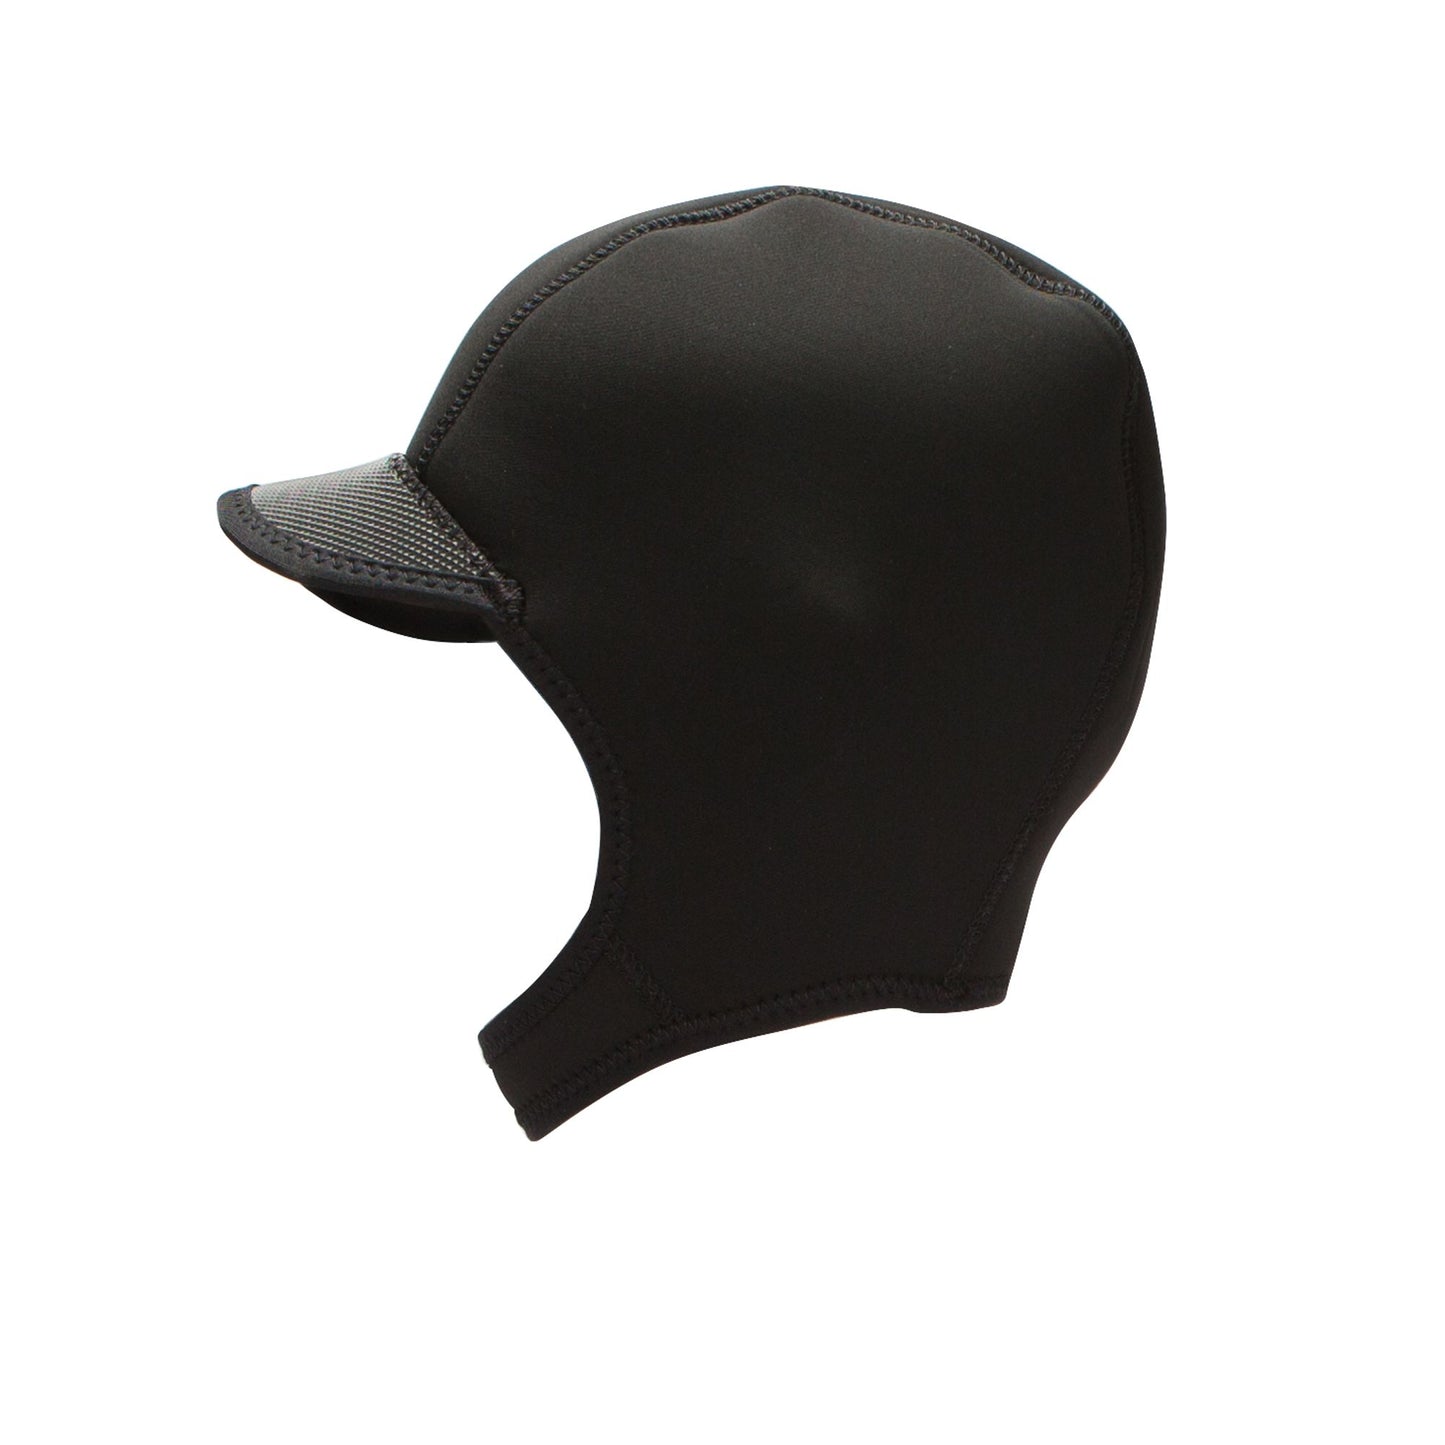 A black Storm Cap with a neoprene visor, providing thermal protection by NRS.